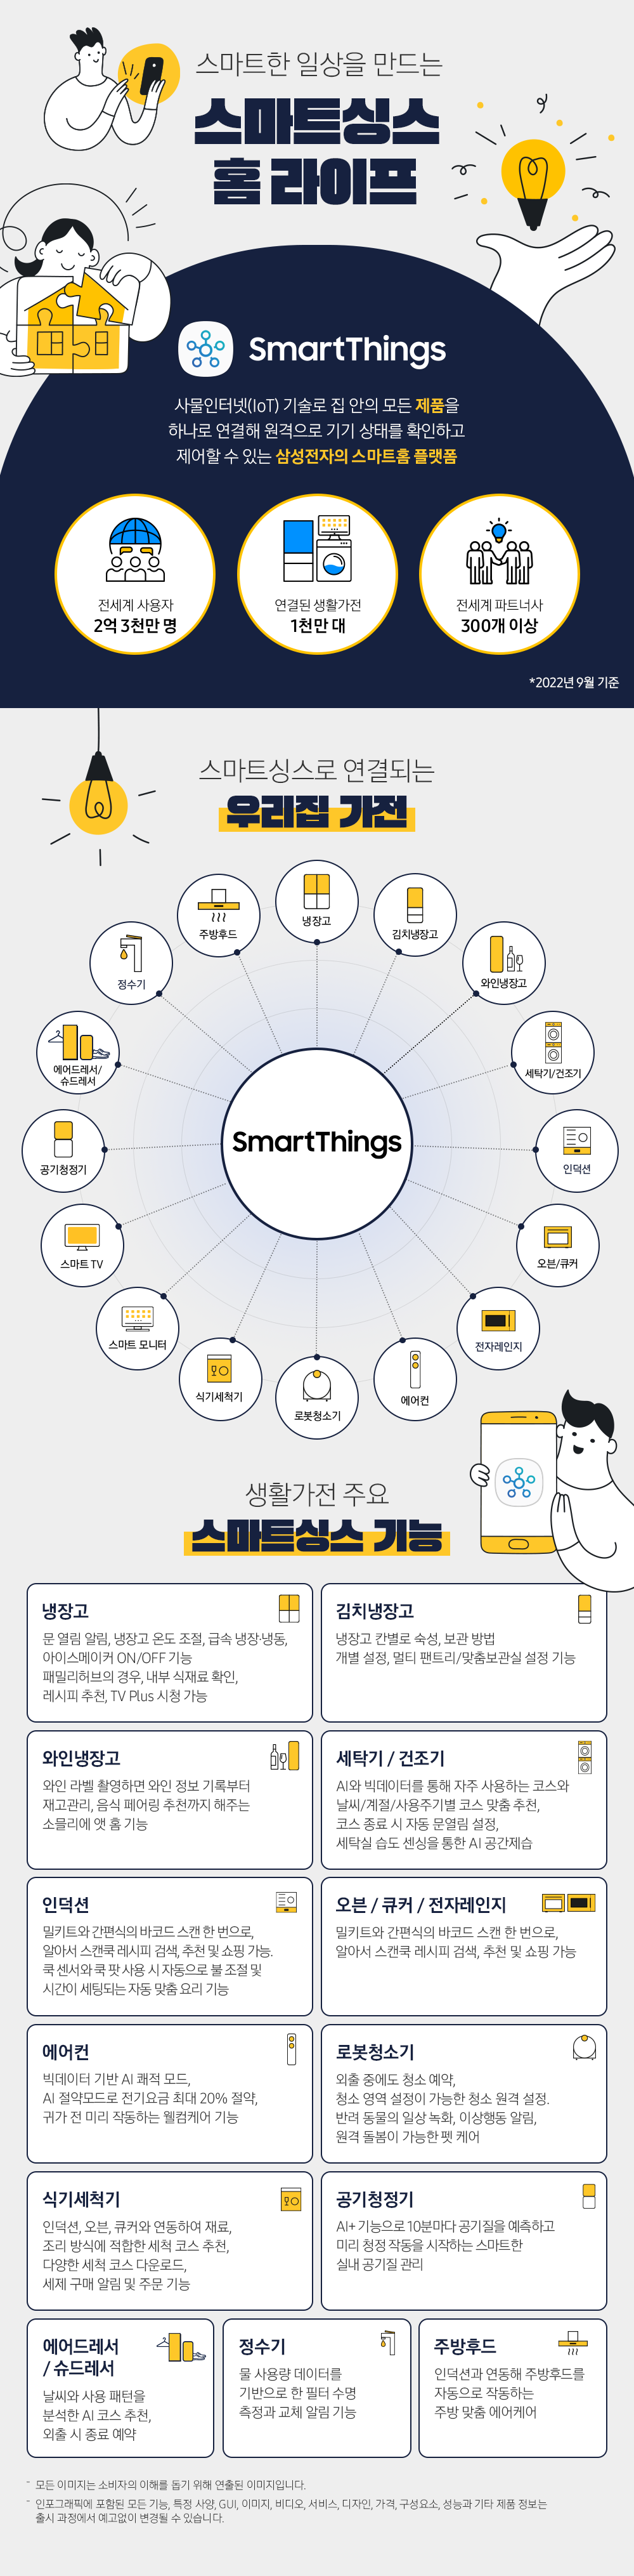 Samsung SmartThings Infographic